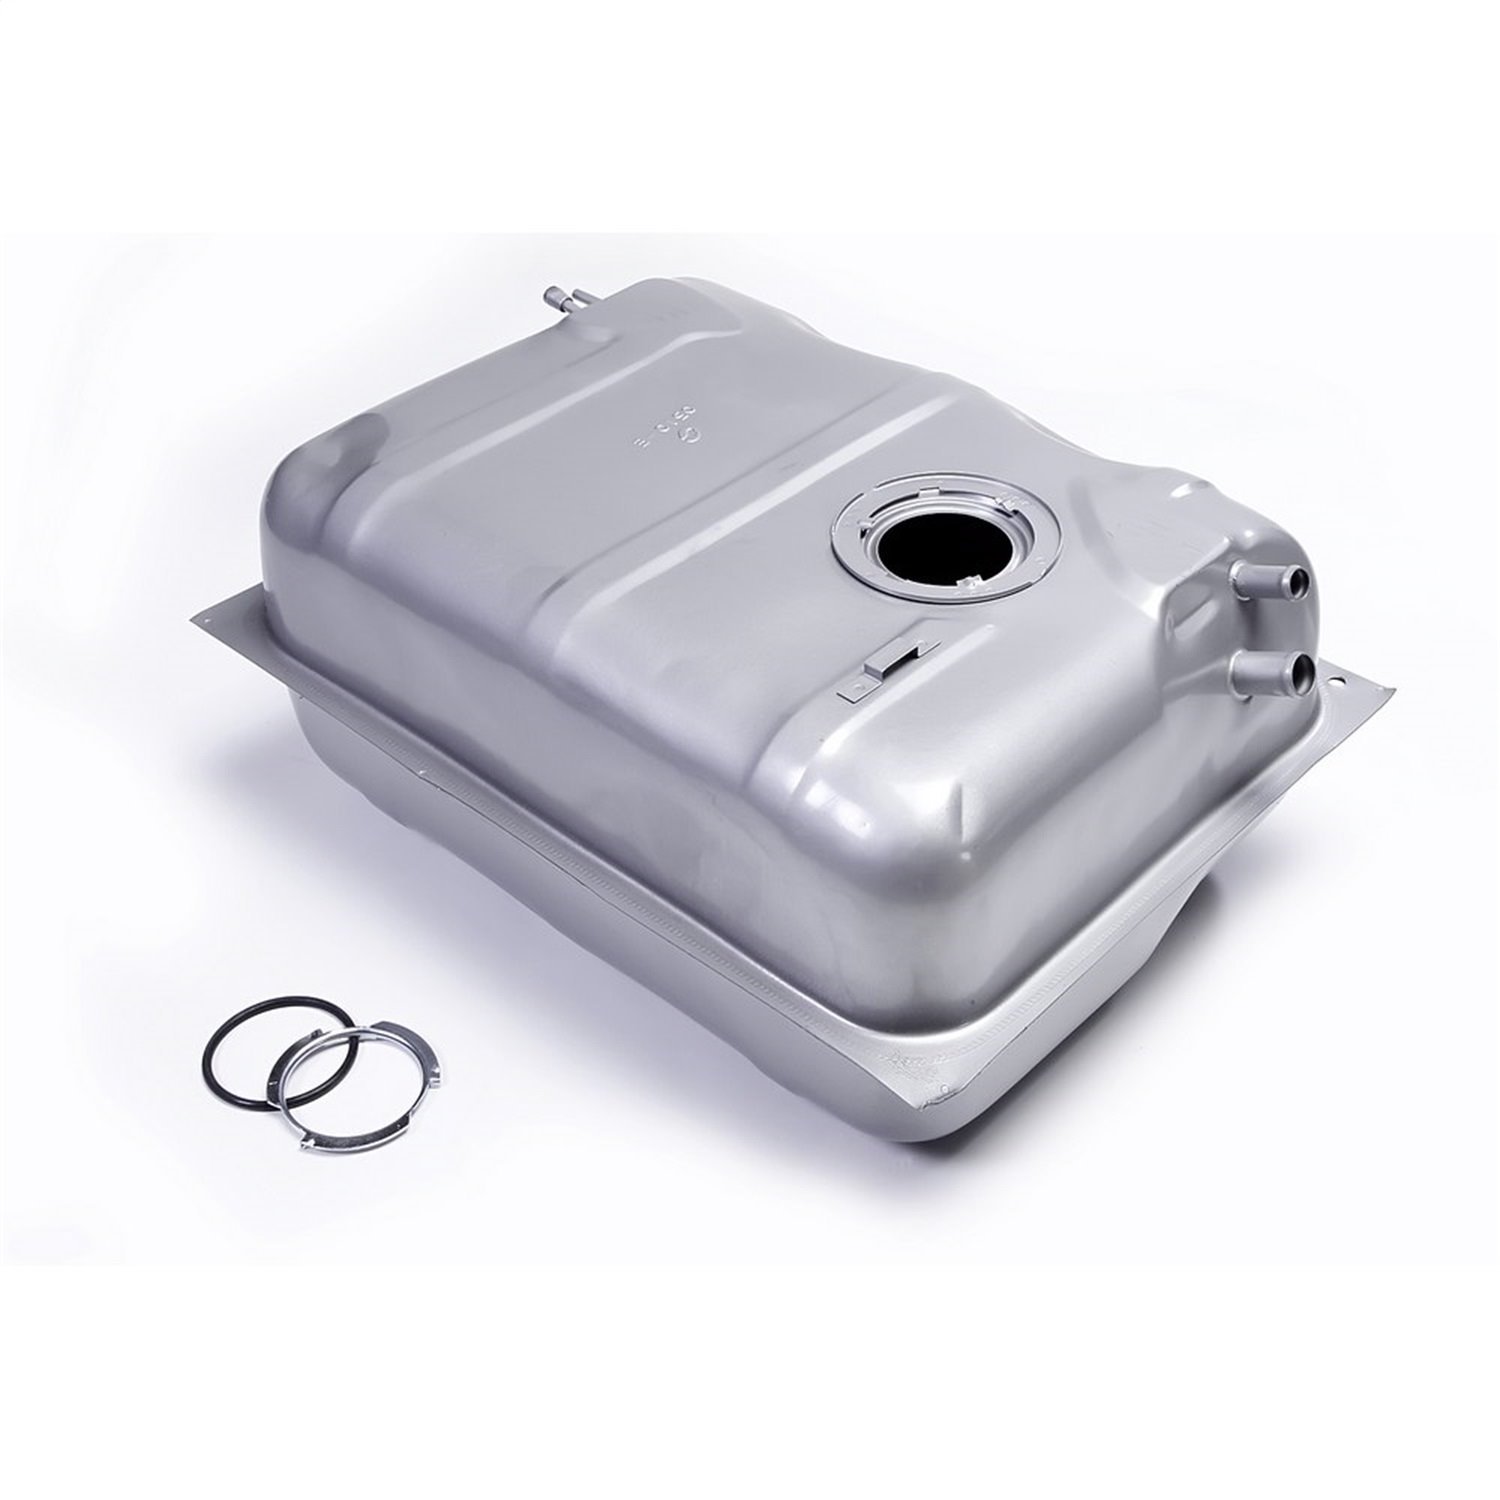 This 15 gallon gas/fuel tank by Omix-ADA fits 1987-1990 Jeep Wrangler YJ with 2.5 liter engine.